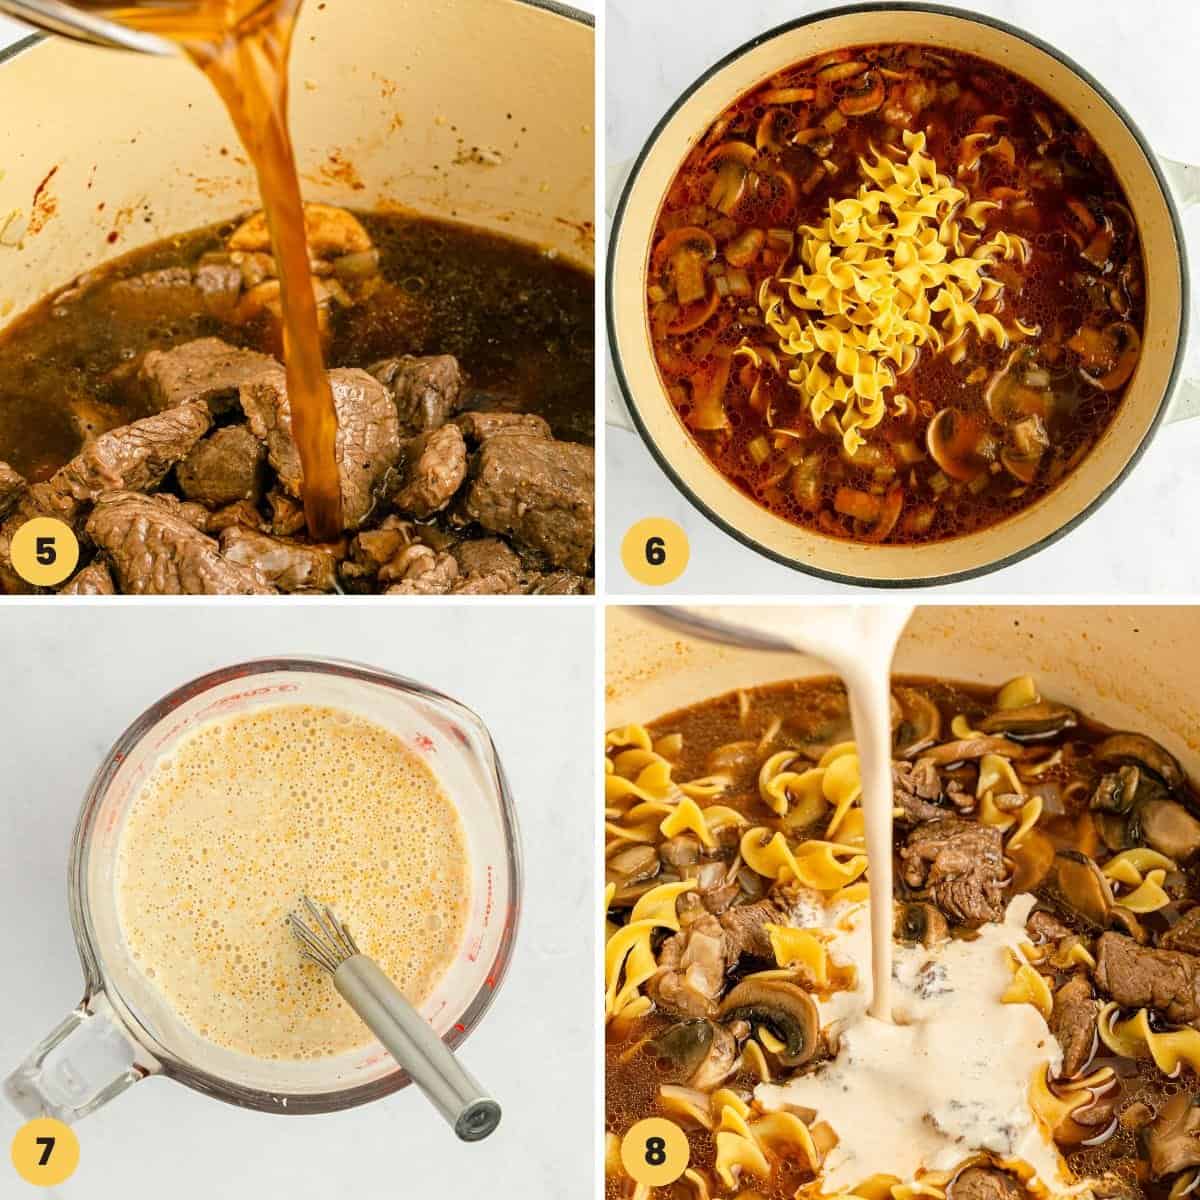 A collage of four images showing how to make beef stroganoff soup